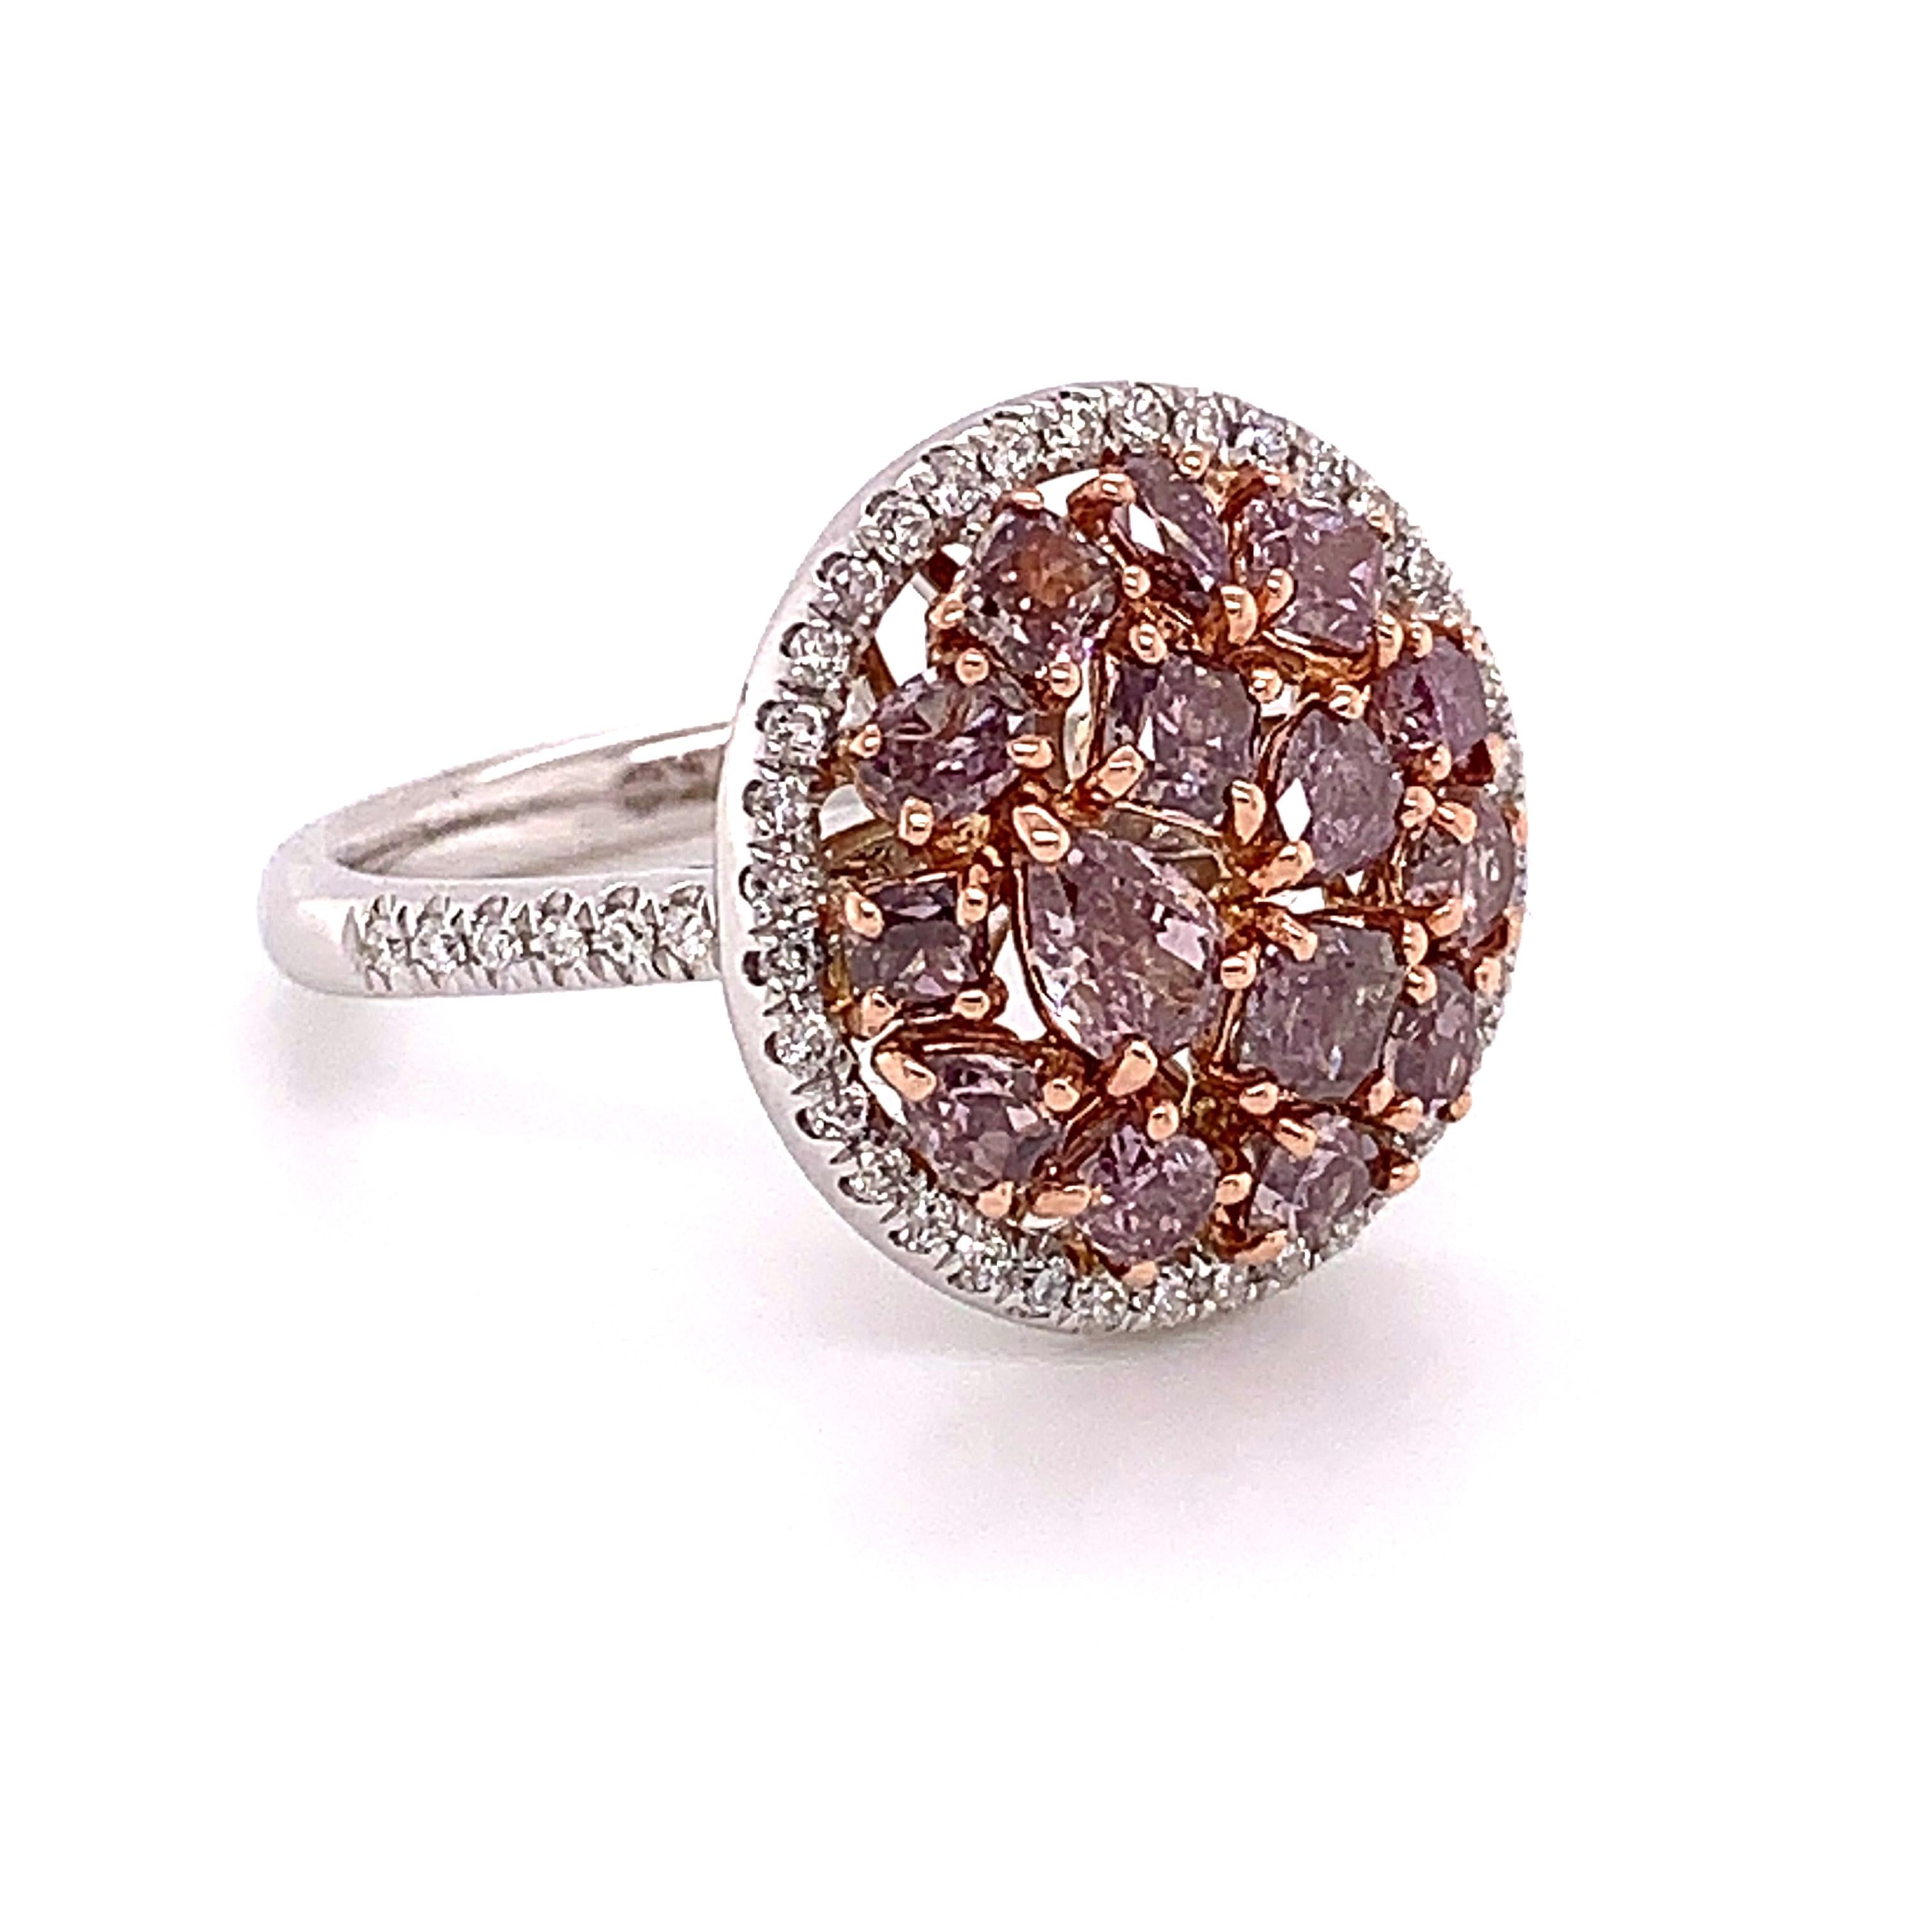 Exquisite Natural Pink Diamond Cluster Ring. This ring features a Cluster Center of Mixed Cut Natural Fancy Pink Diamonds surrounded by a dainty but powerful Halo of White Diamonds. 
Total Carat Weight: 2.28 Carat
Natural Fancy Pink Diamonds:1.97